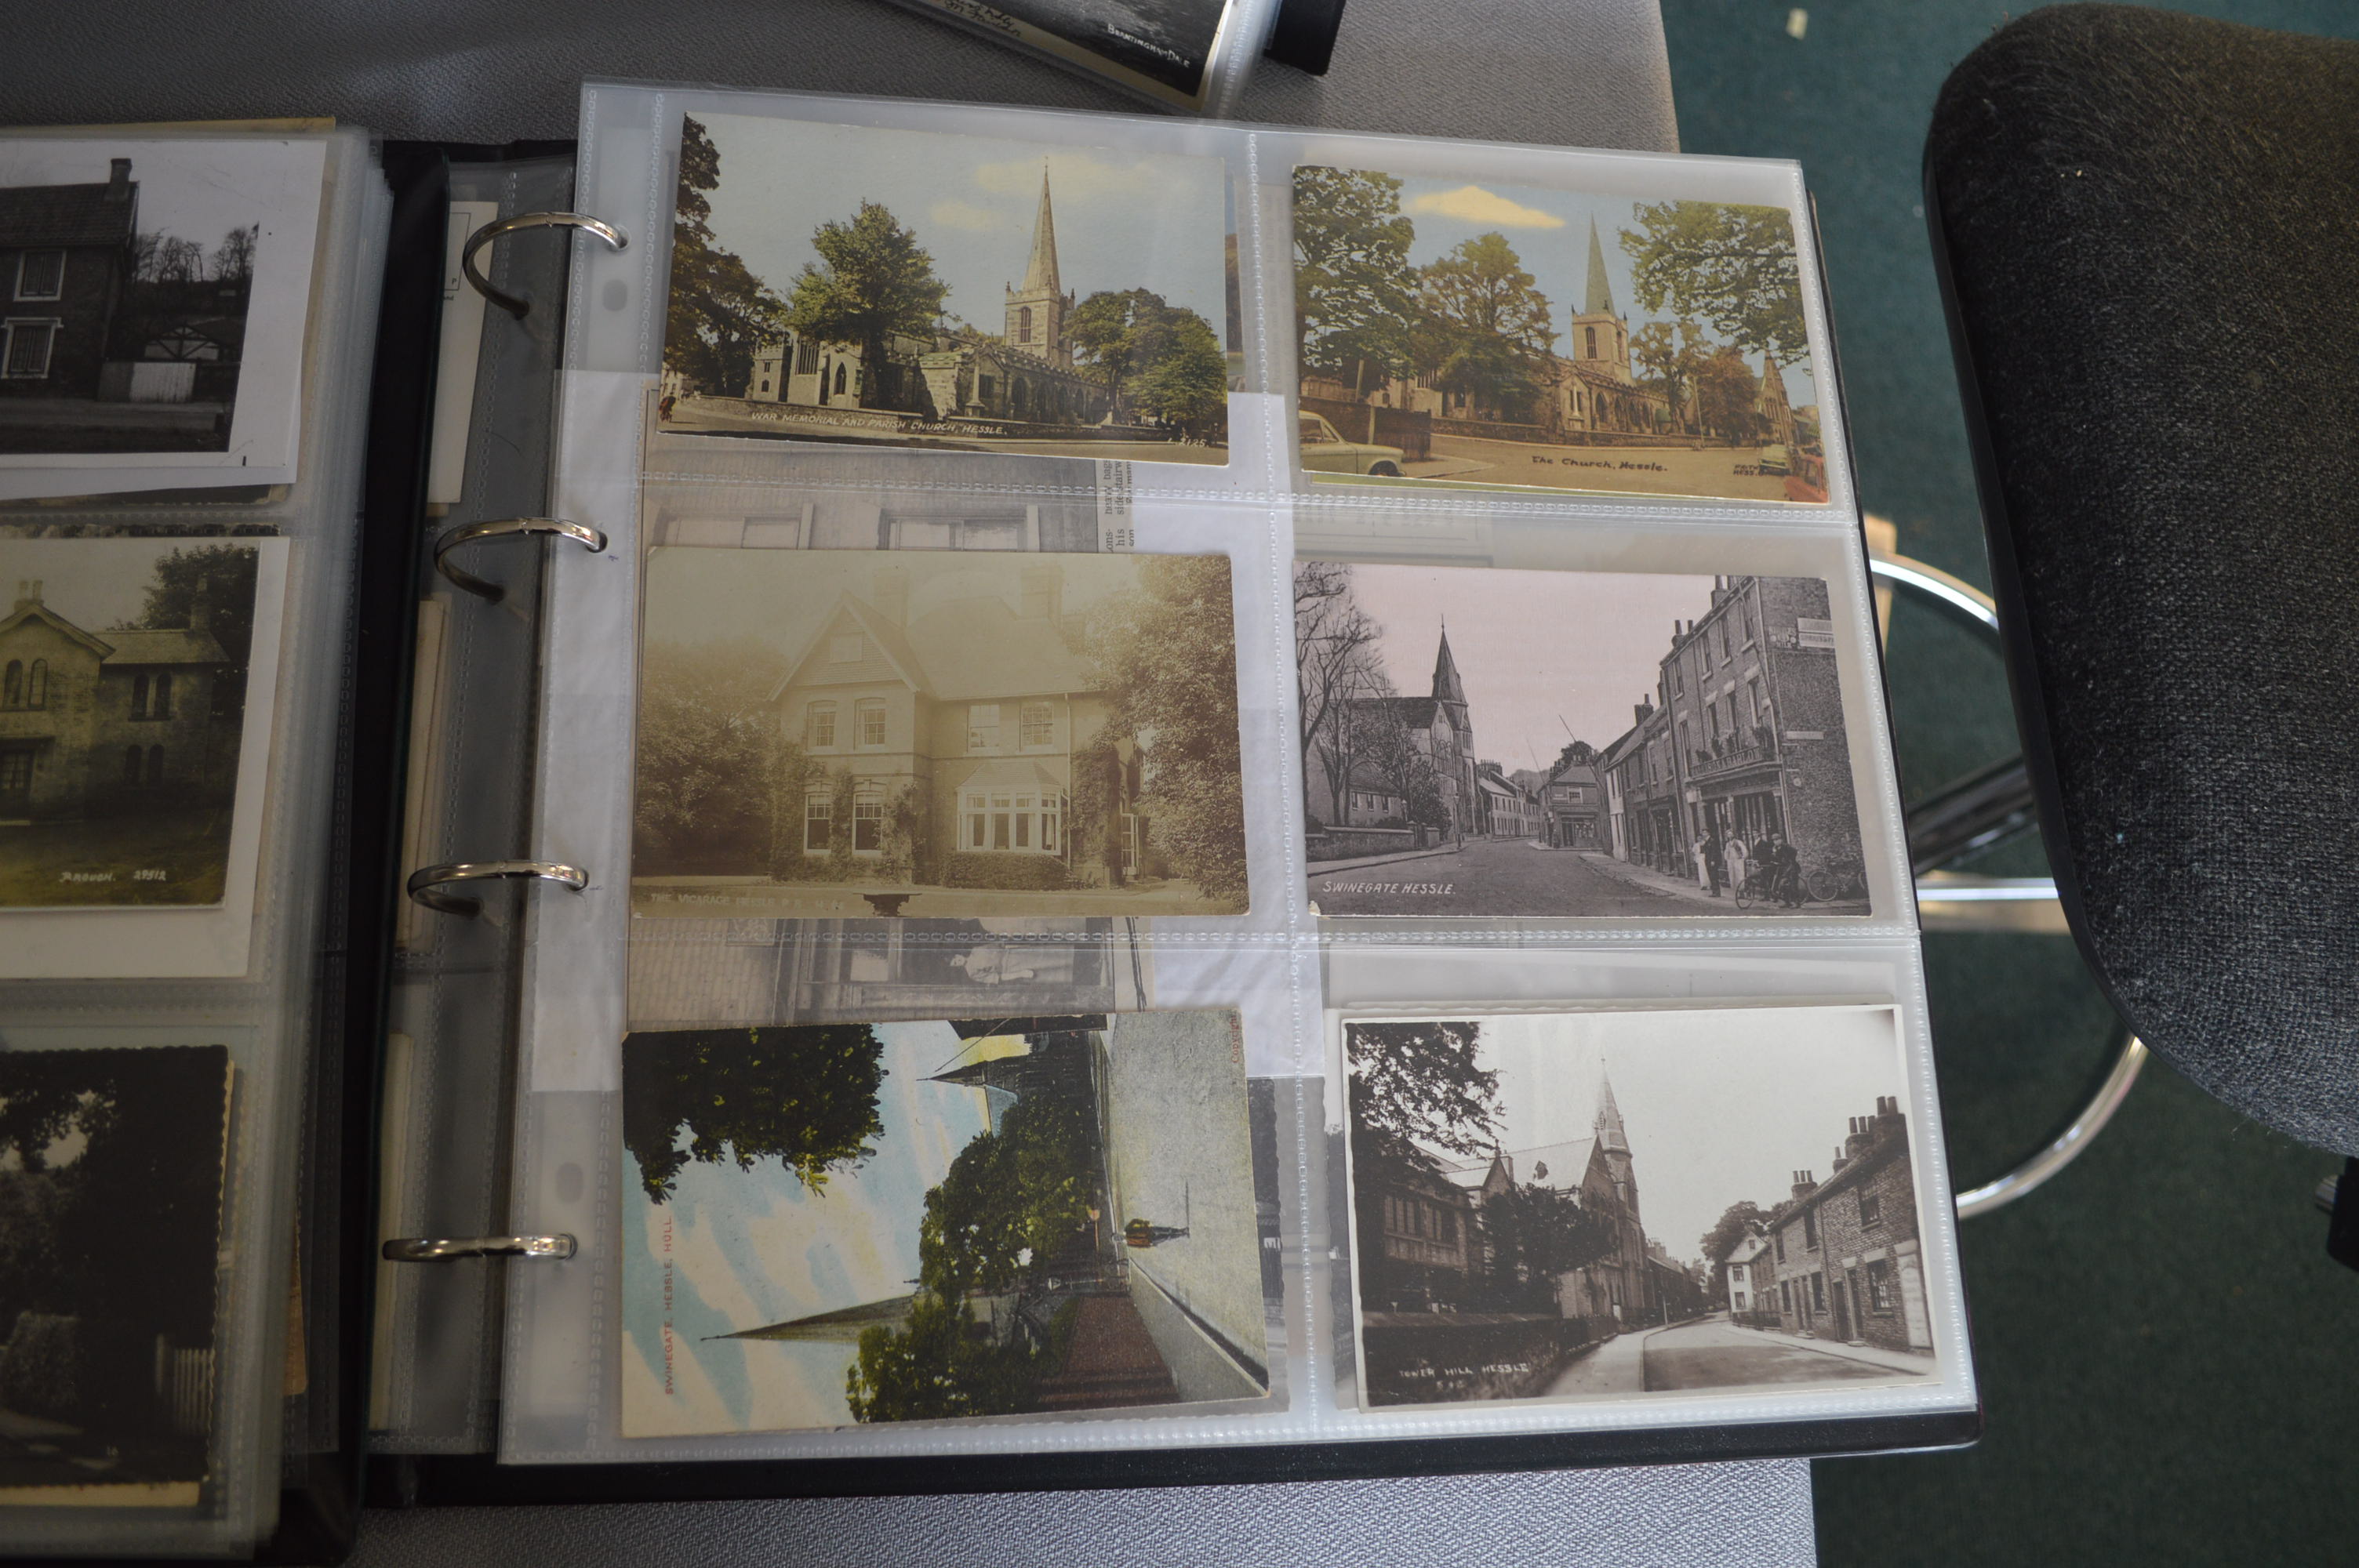 Three Postcard Albums Containing Cards of Hessle and East Yorkshire Villages - Image 2 of 3